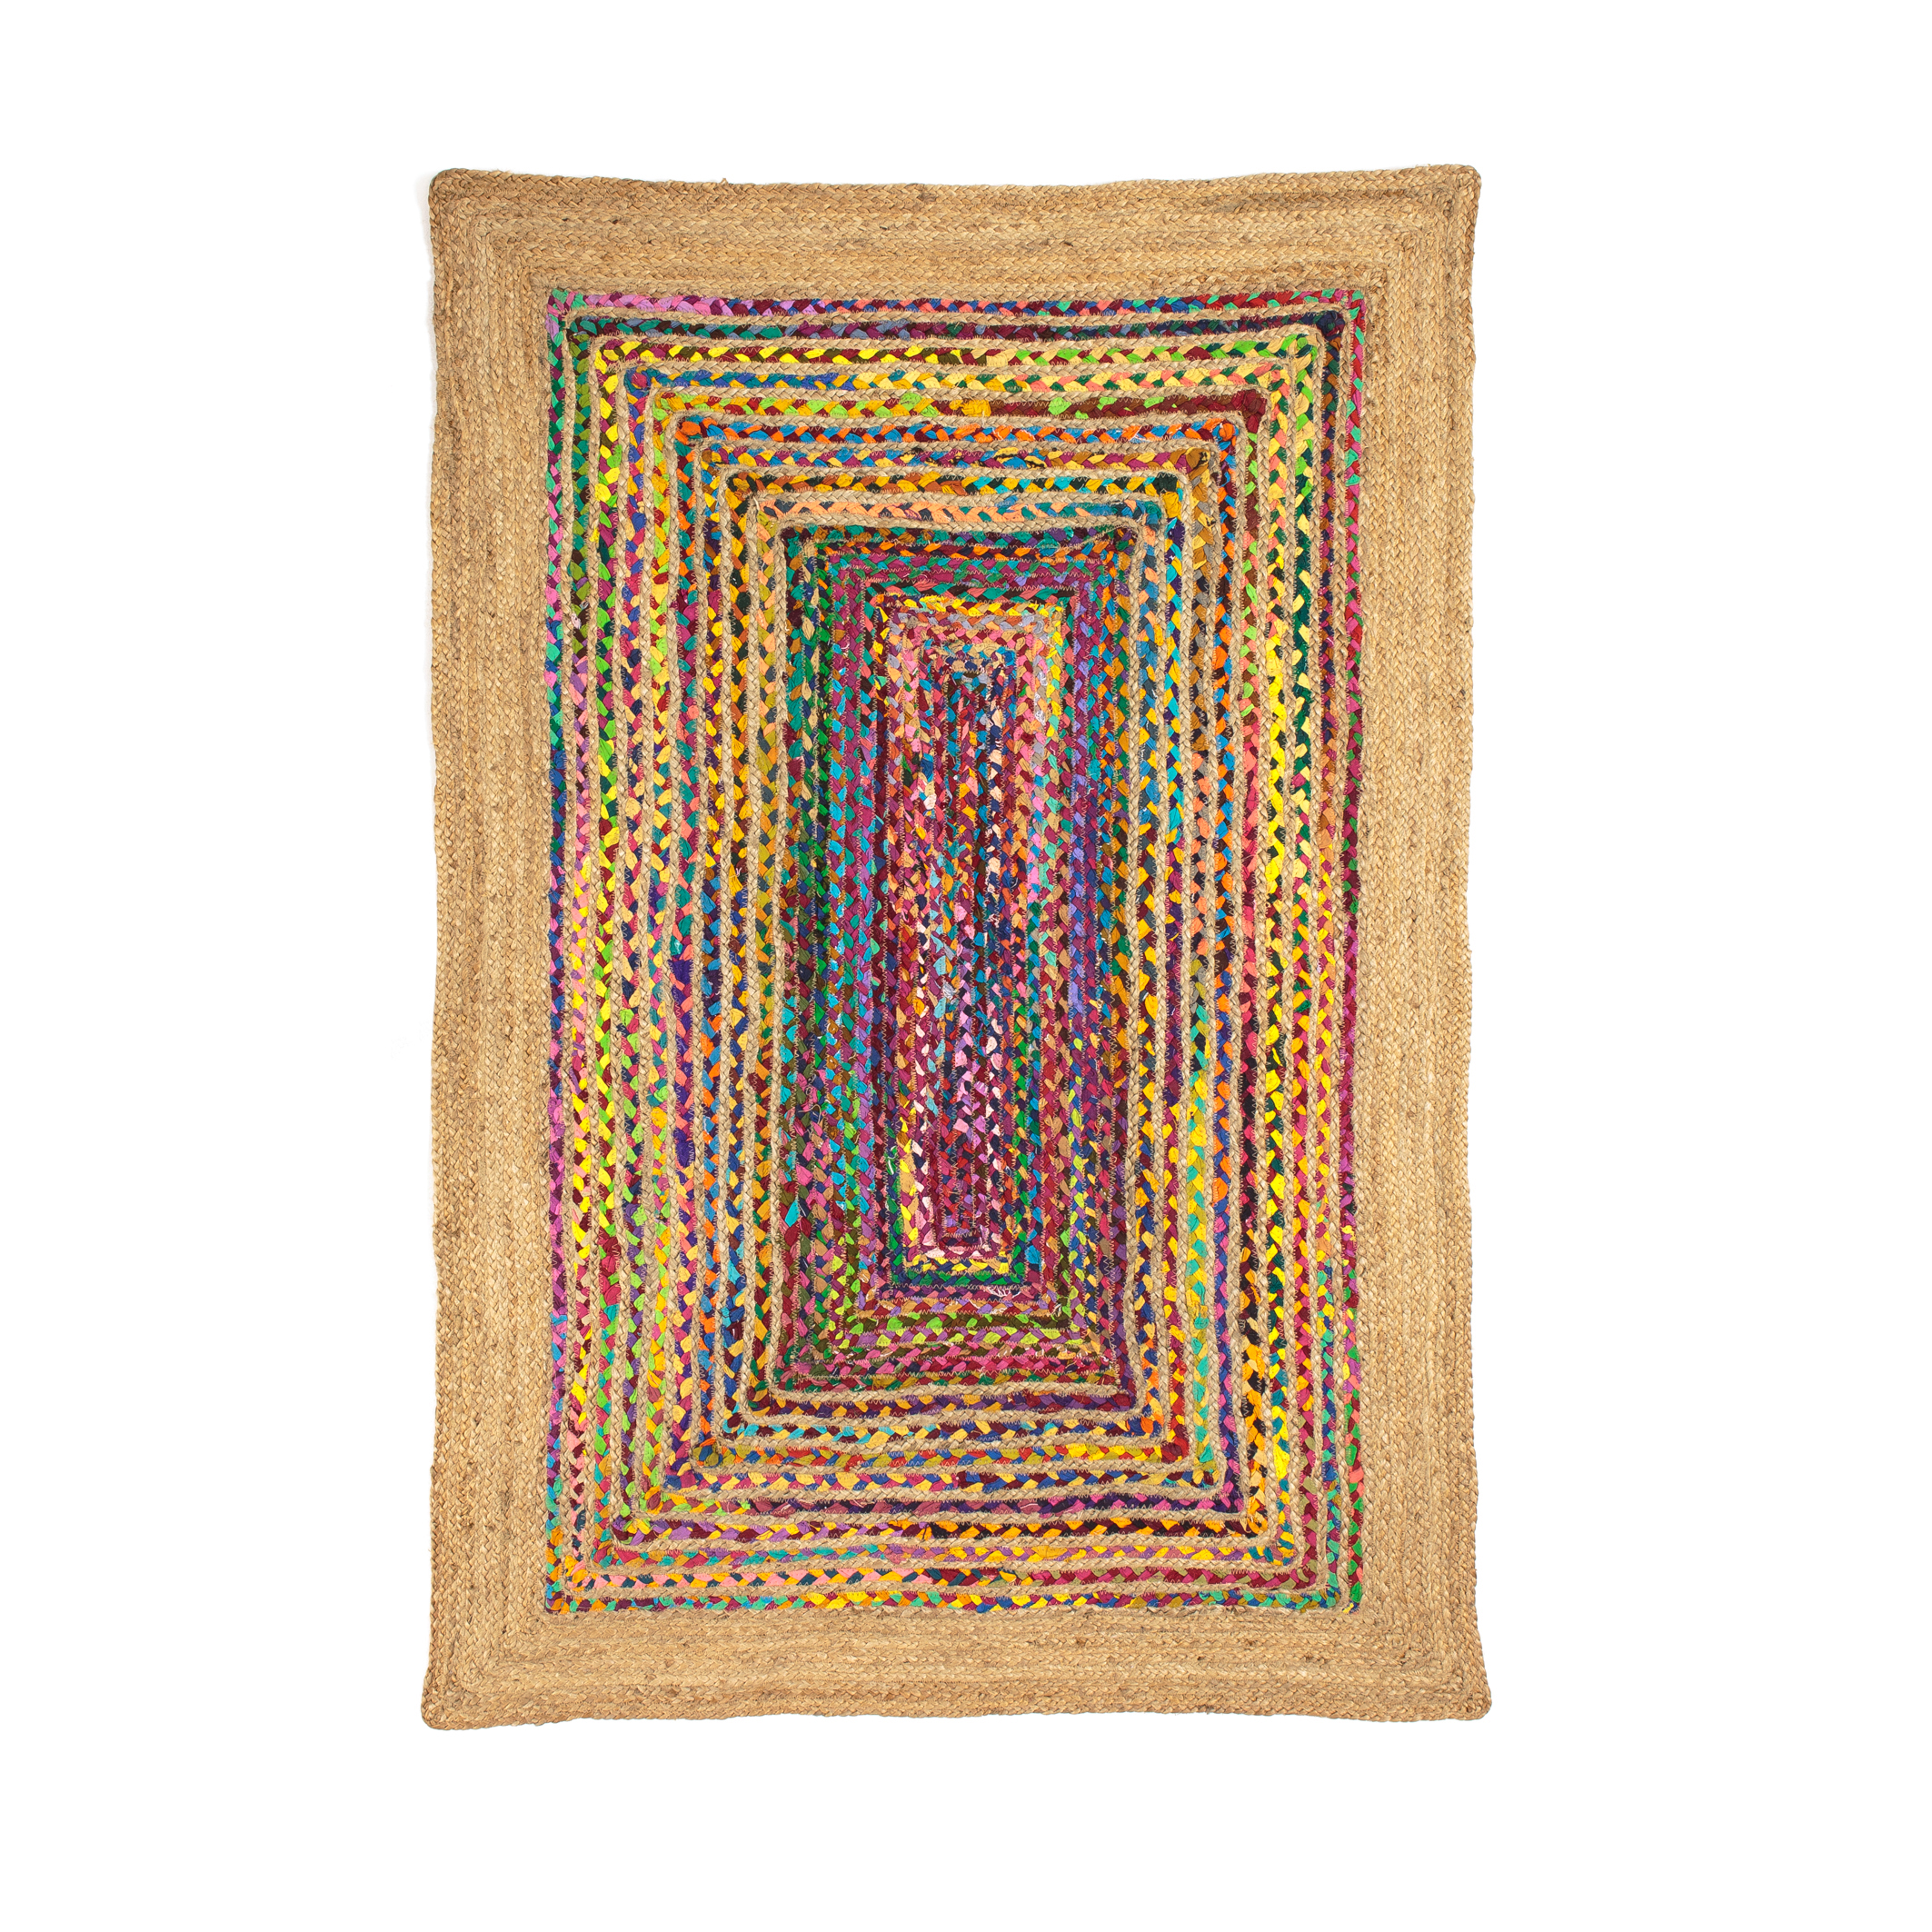 Jaco Rug With Jute And Multicolour, 6×9 Jute Rug